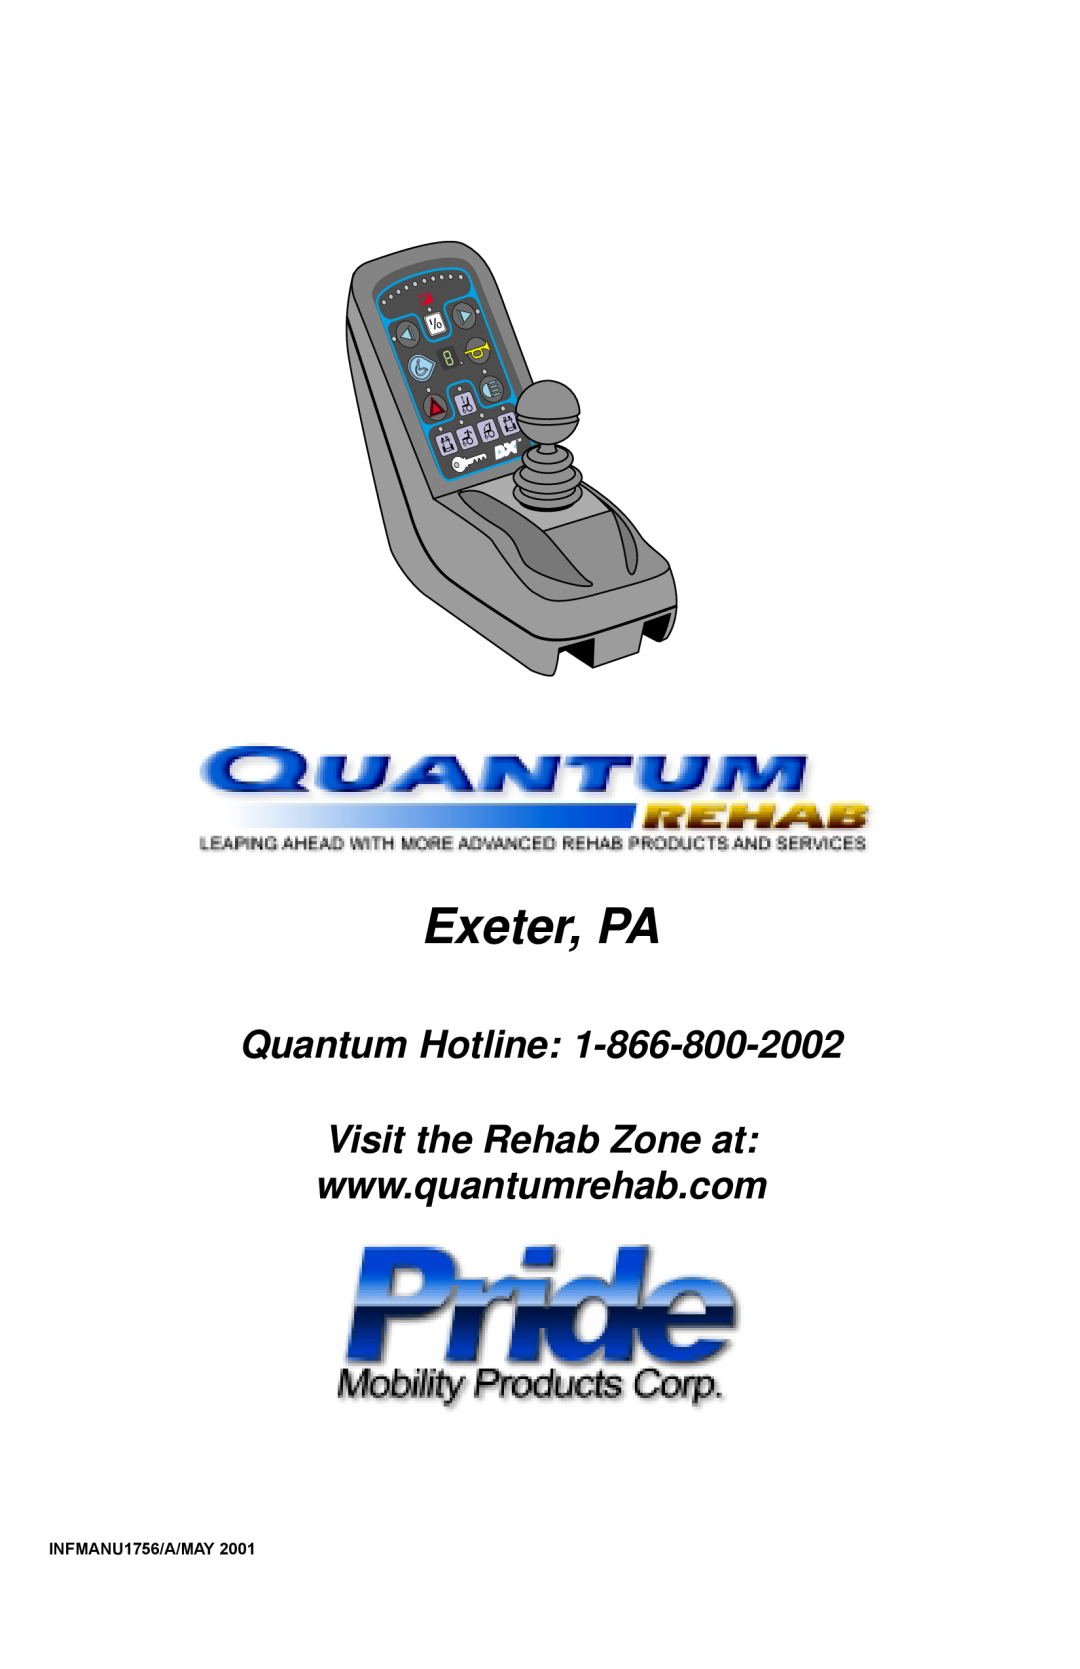 Quantum Dynamic Dolphin Remote manual Exeter, PA, Quantum Hotline Visit the Rehab Zone at, INFMANU1756/A/MAY 